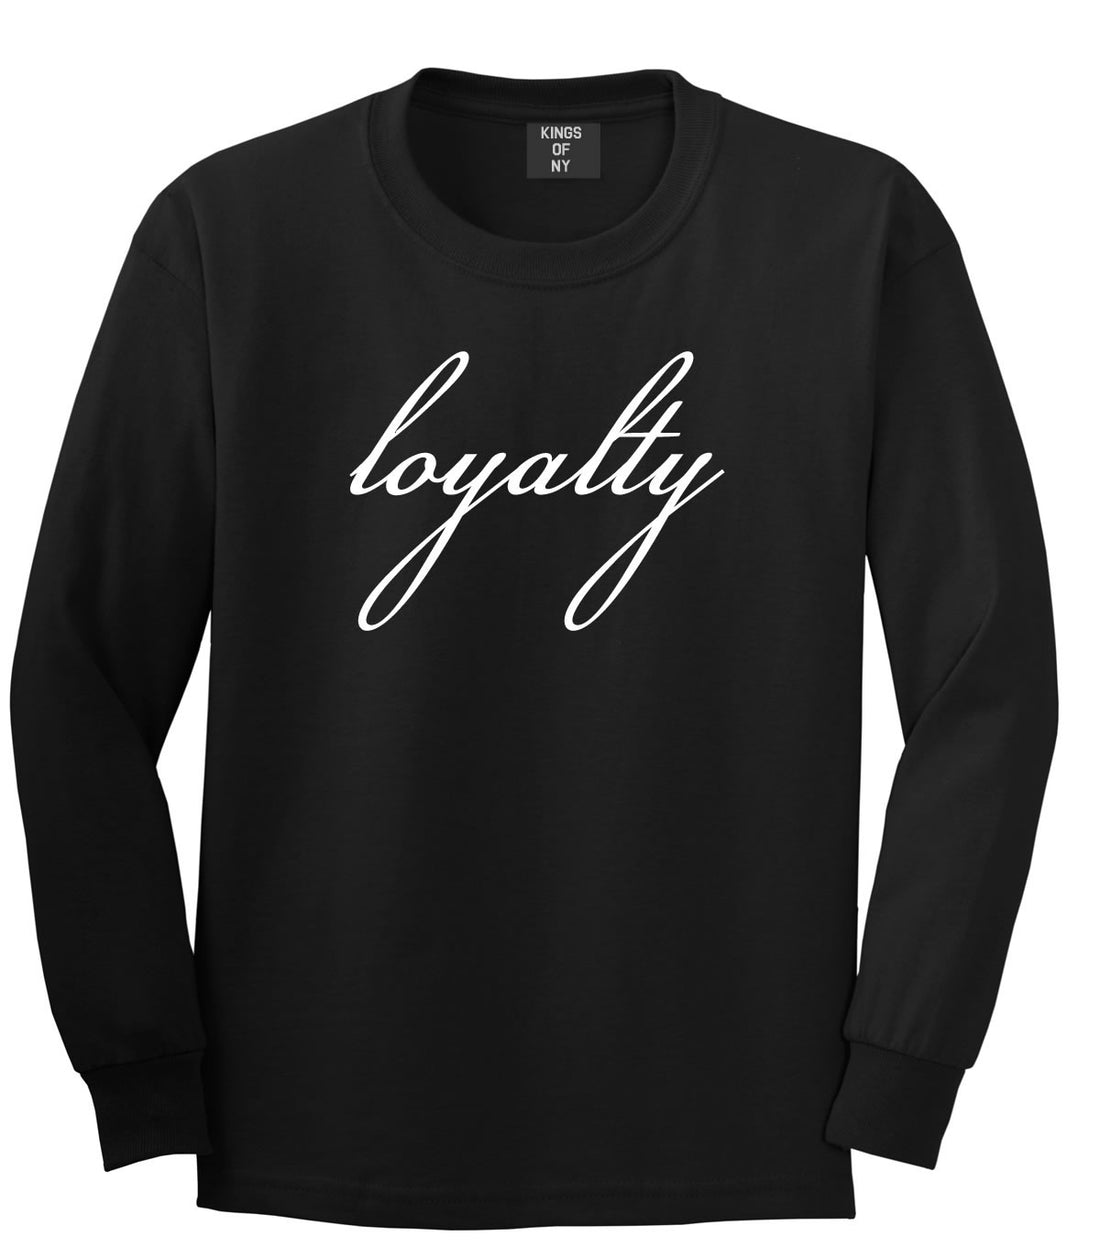 Loyalty Respect Aint New York Hoes Long Sleeve T-Shirt In Black by Kings Of NY